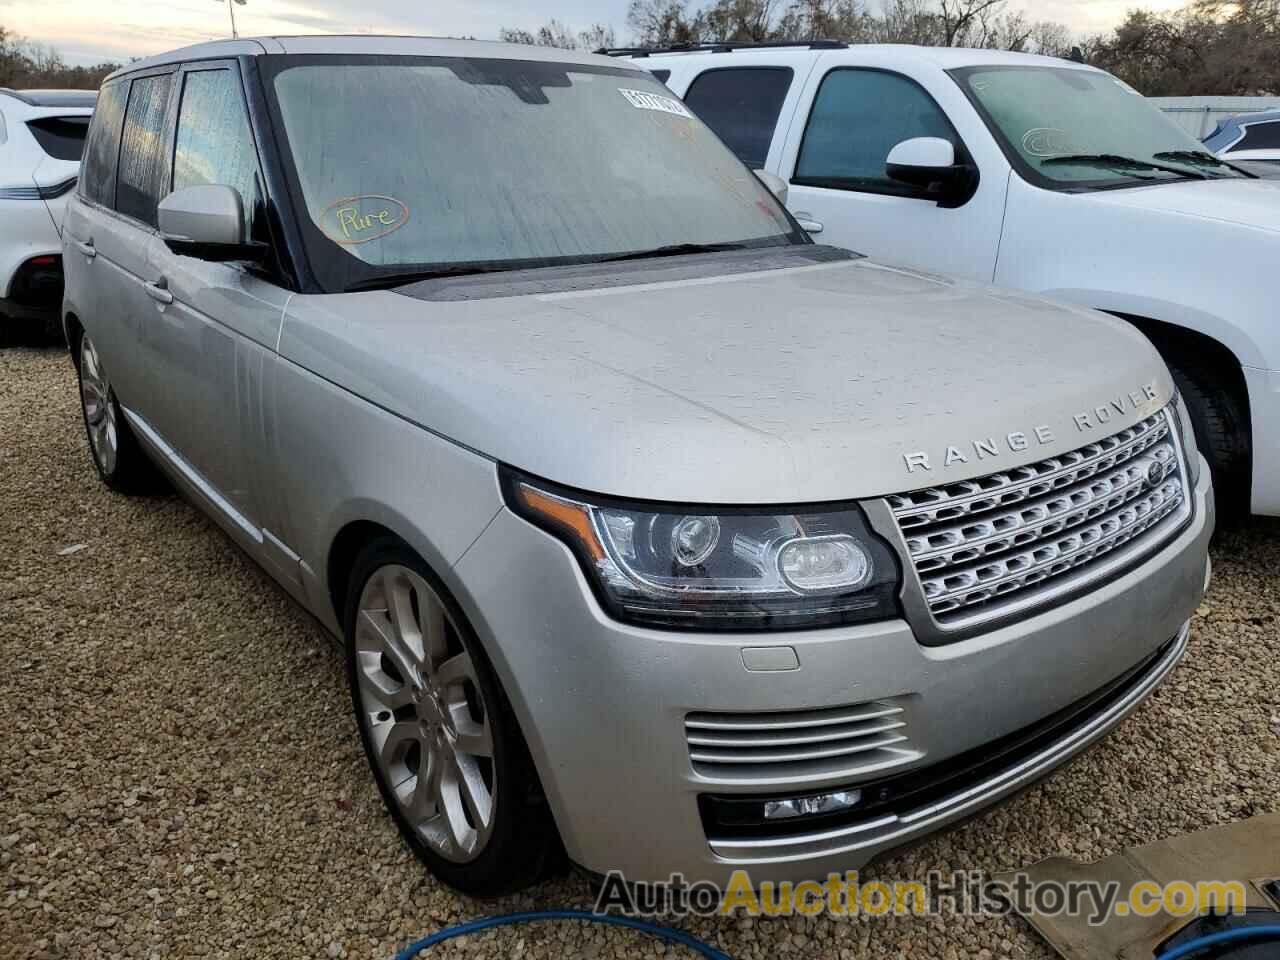 2015 LAND ROVER RANGEROVER SUPERCHARGED, SALGS2TF9FA215649